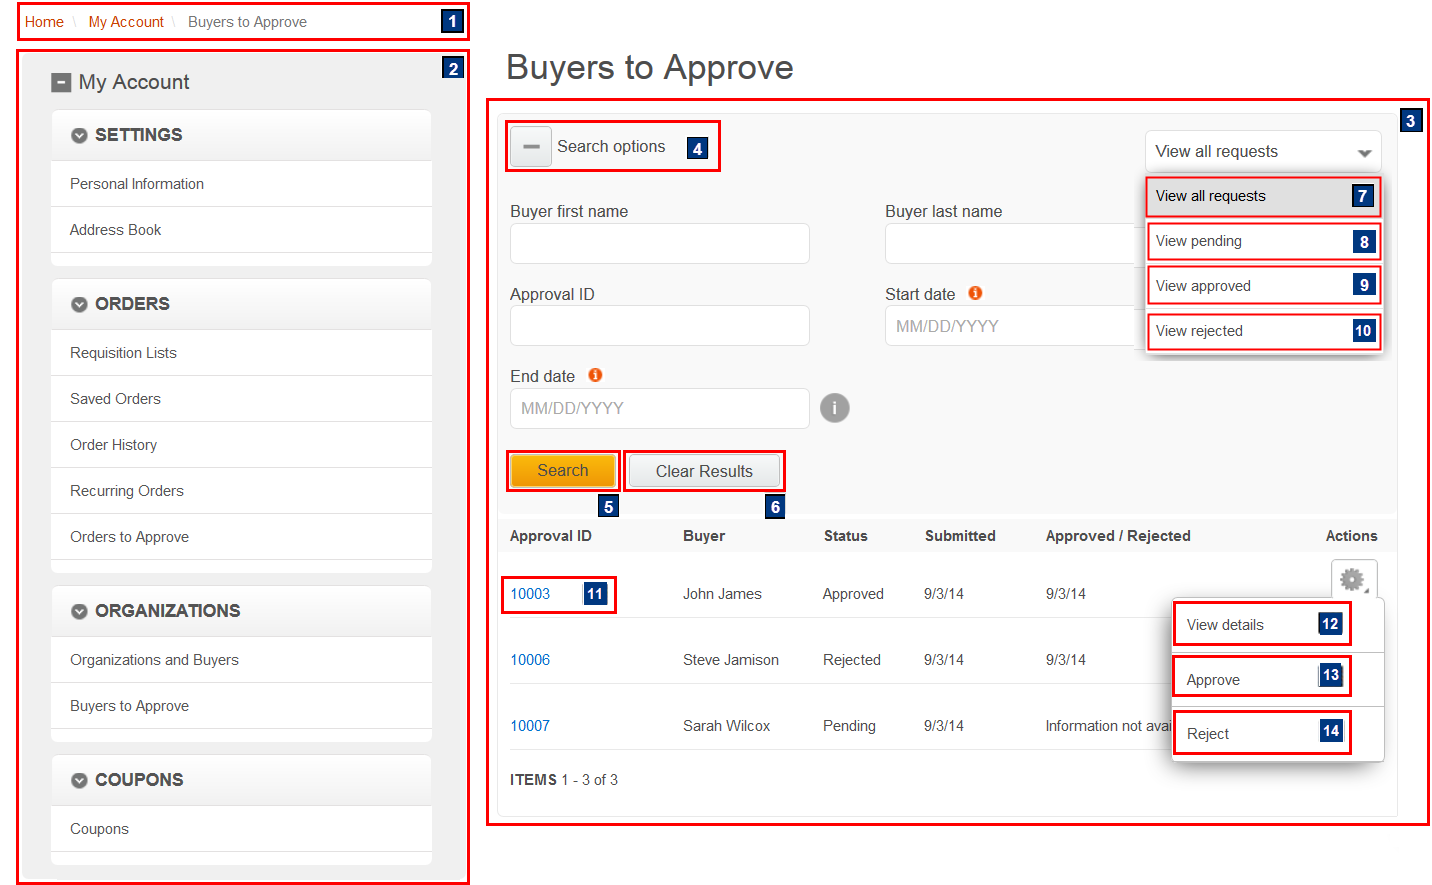 Buyer Approval Details page screen capture